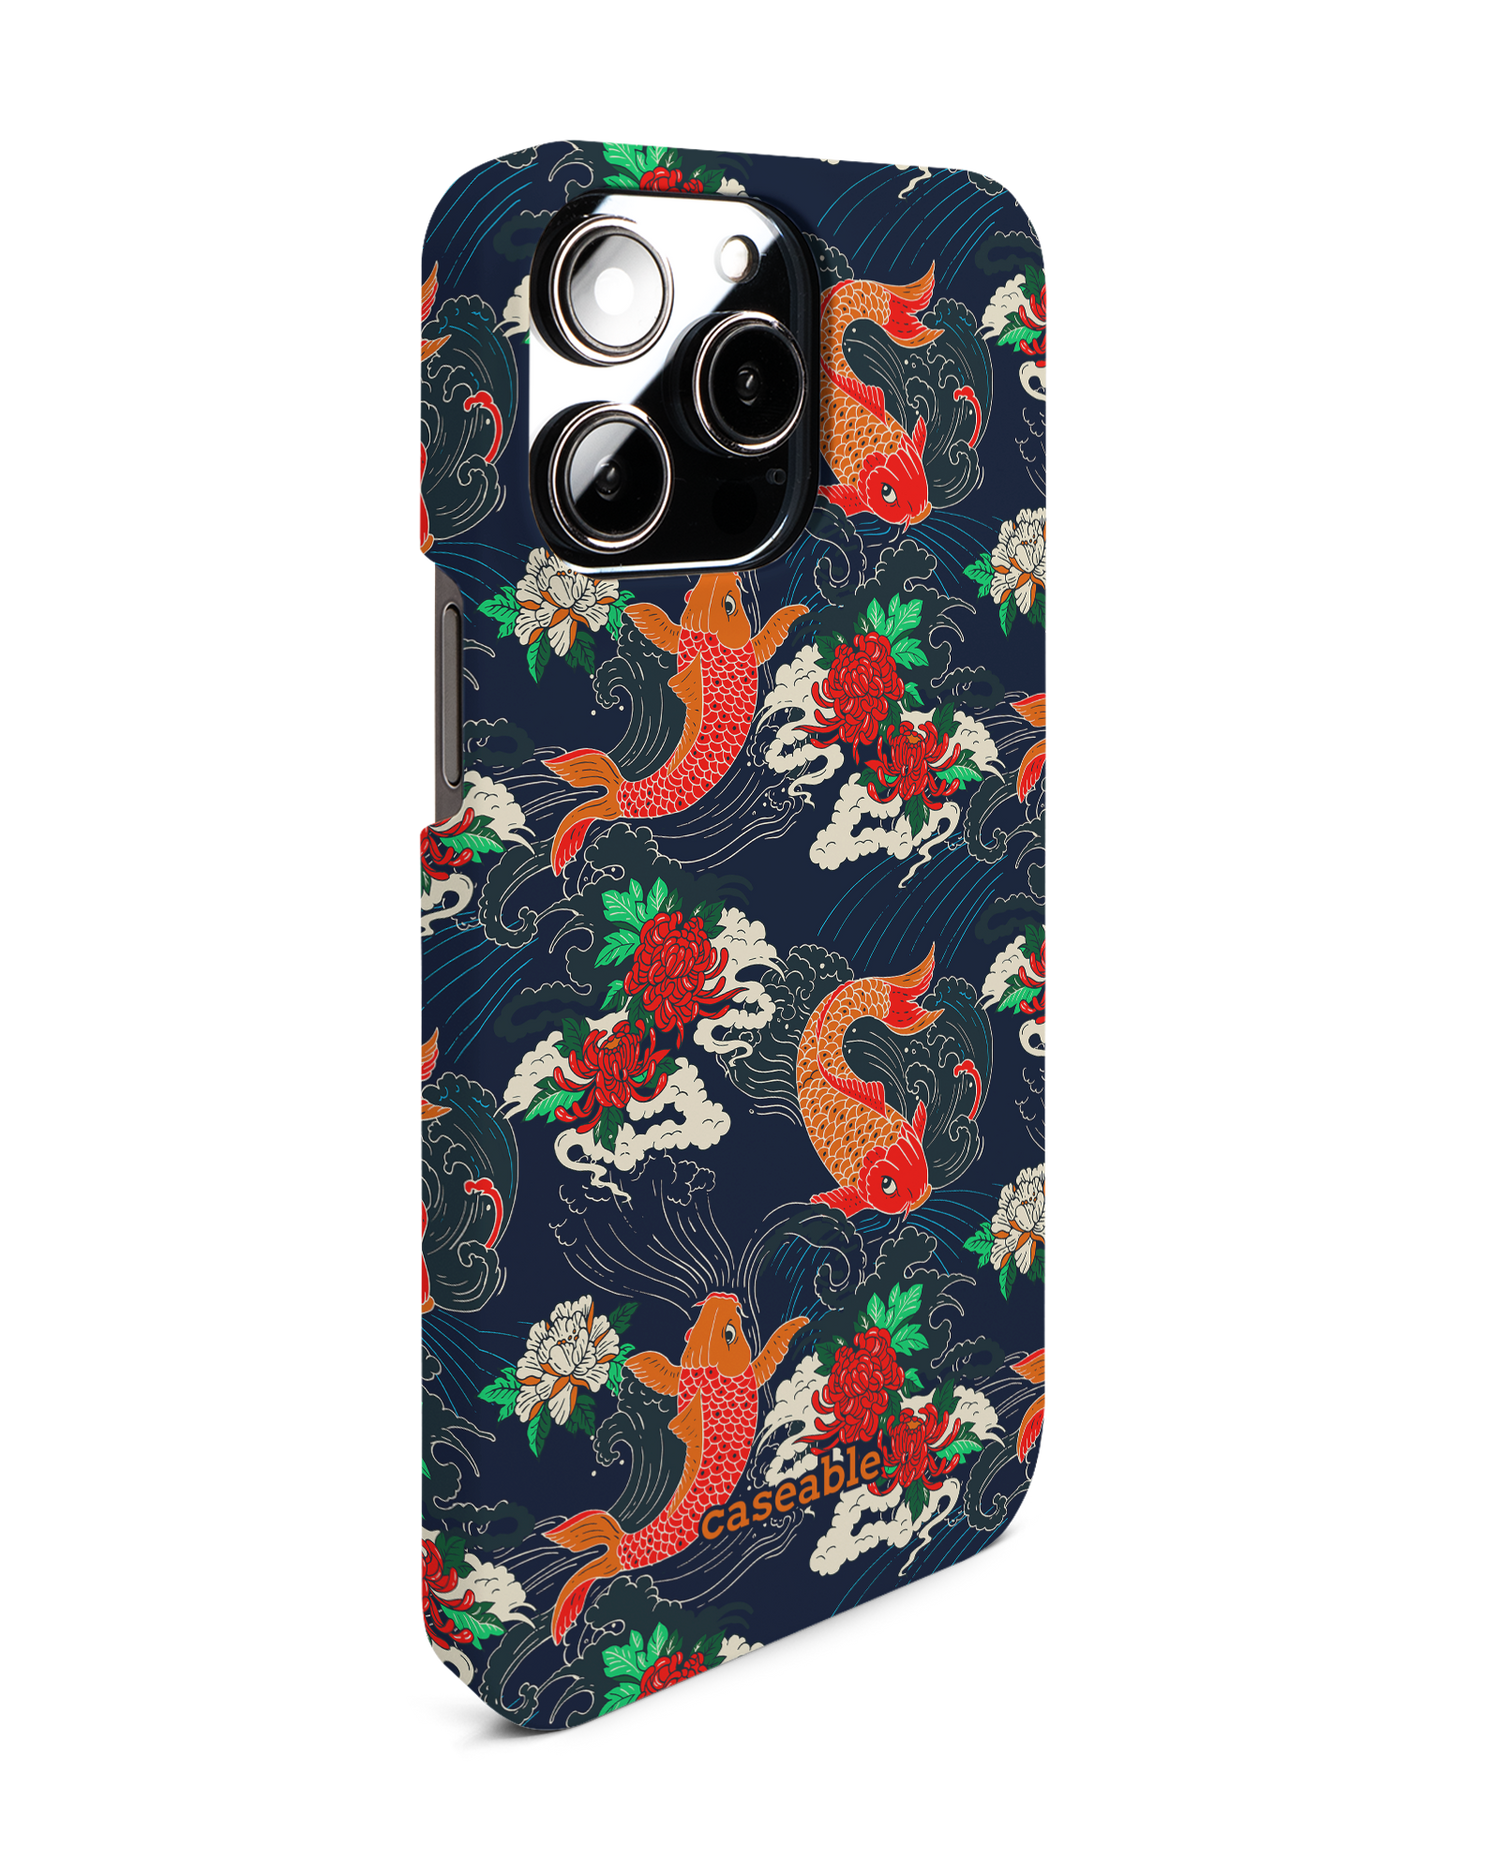 Repeating Koi Hard Shell Phone Case for Apple iPhone 14 Pro Max: View from the left side